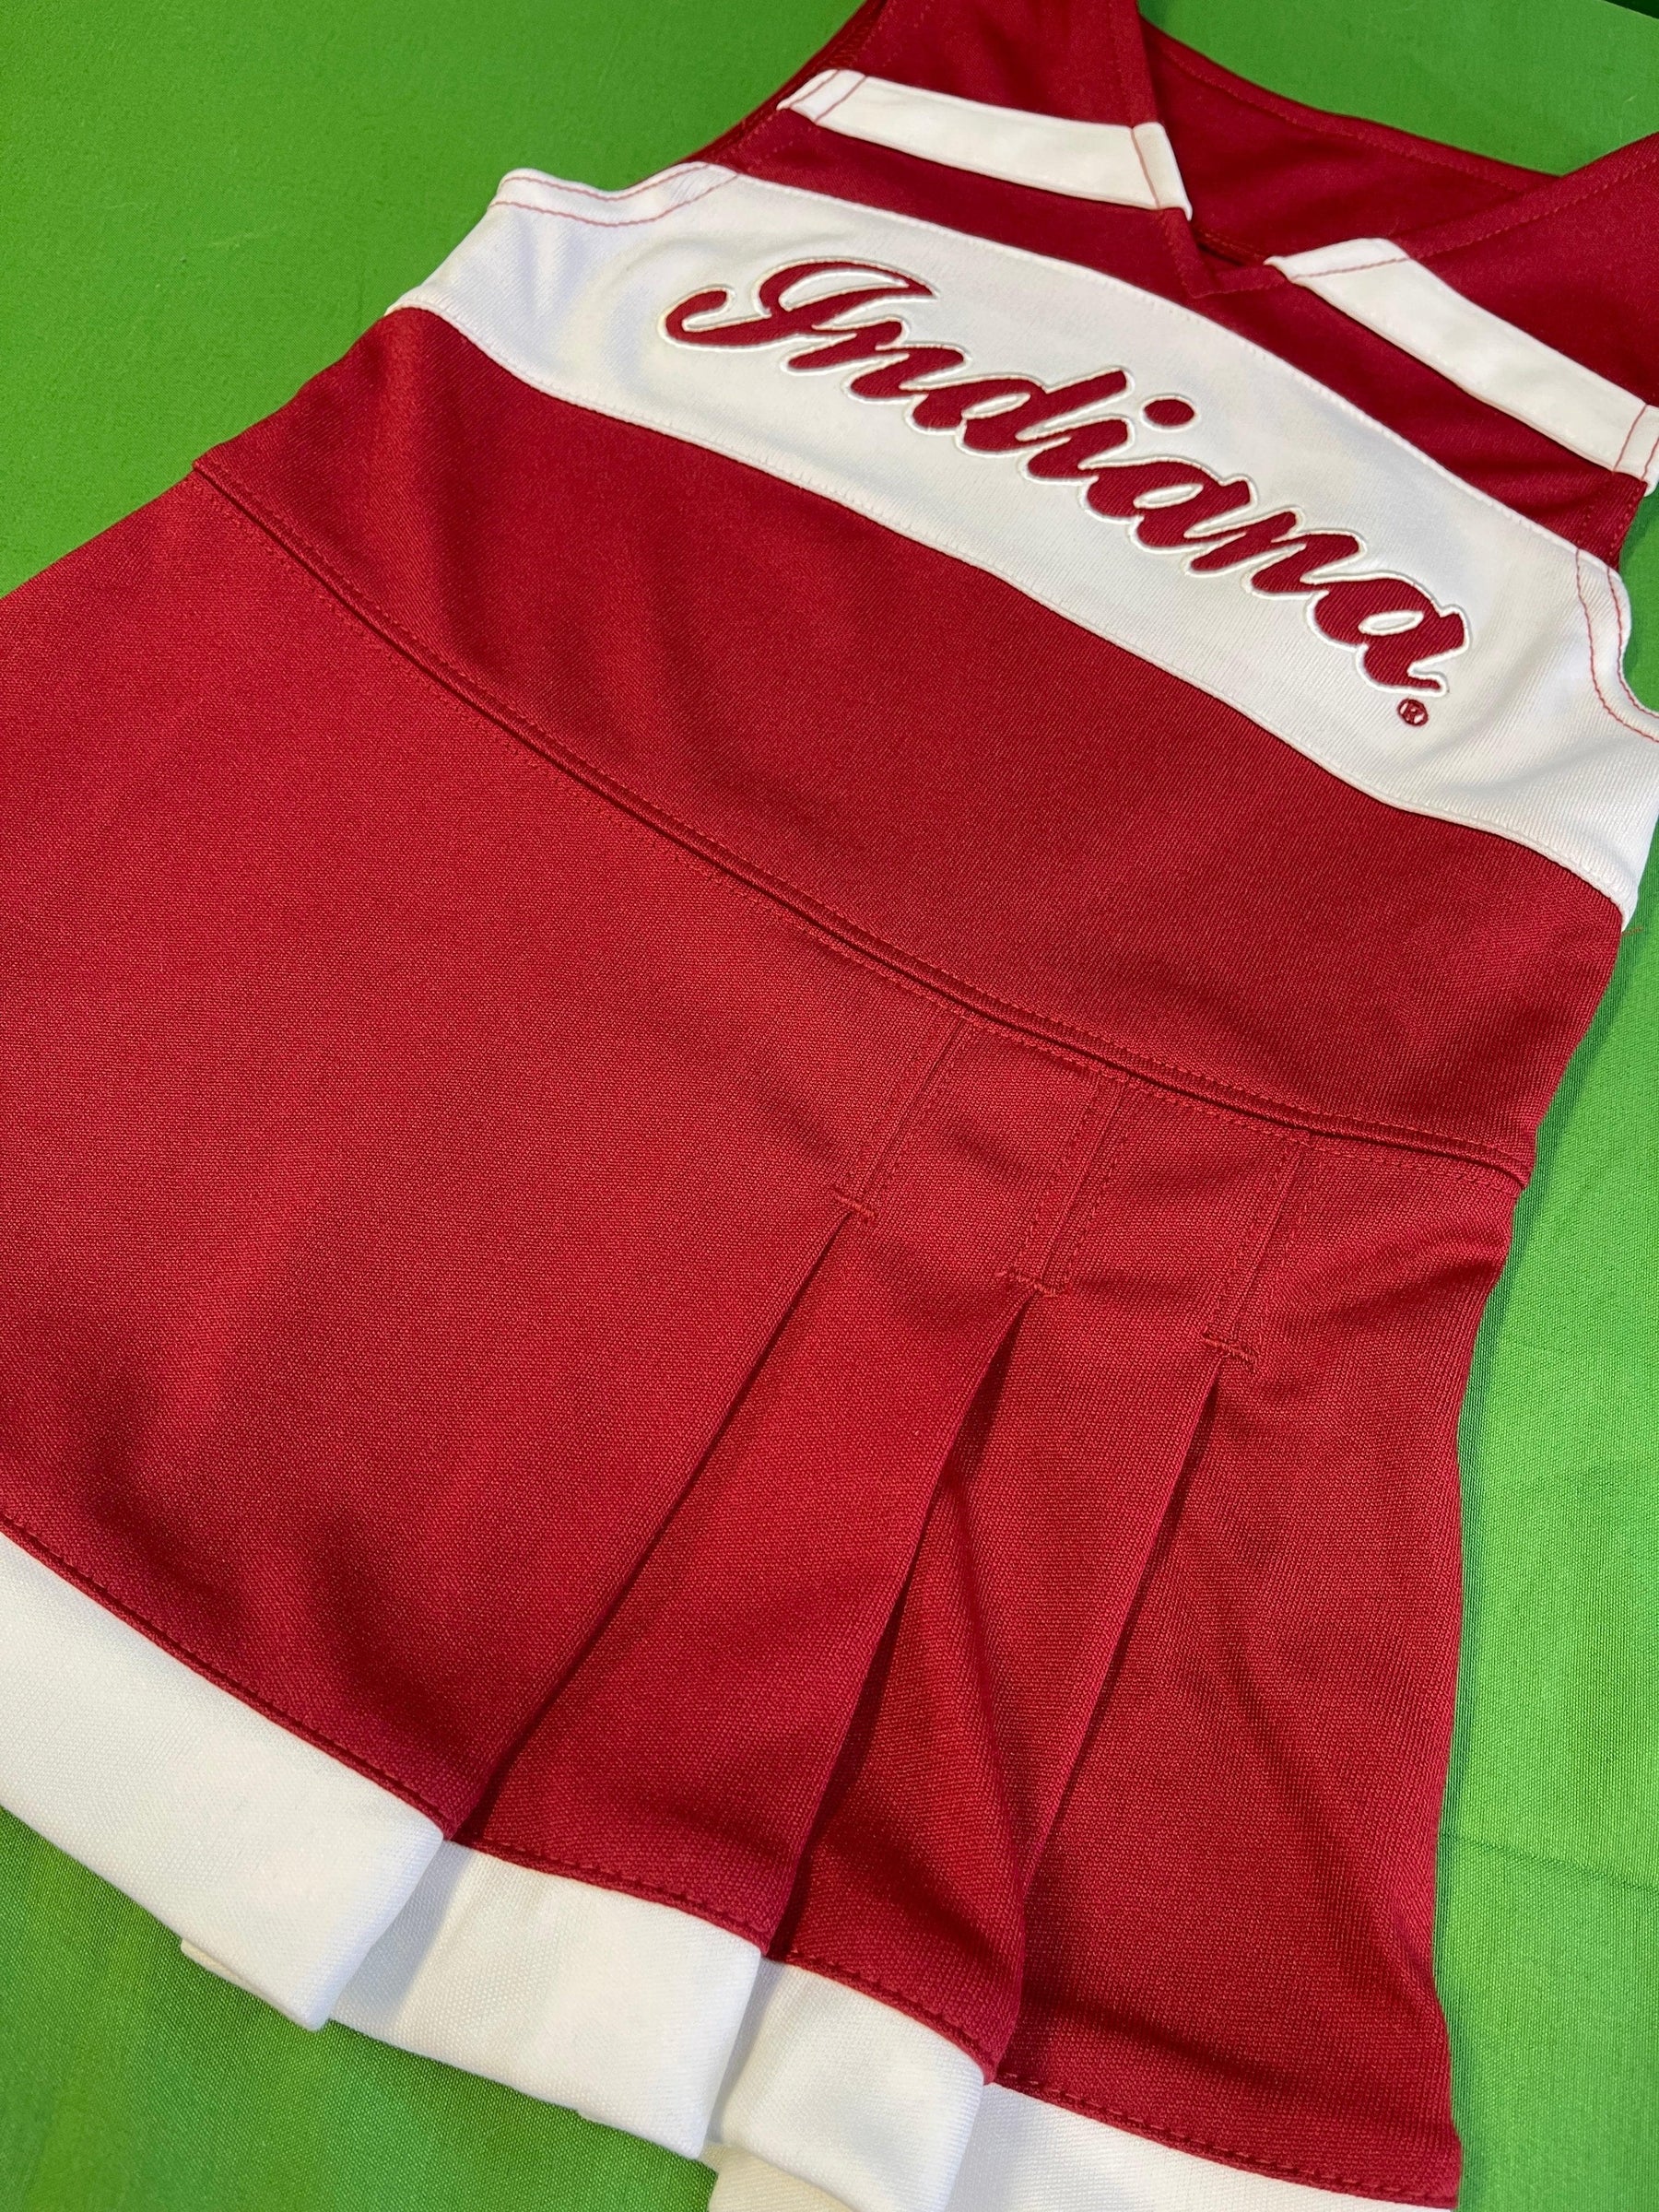 NCAA Indiana Hoosiers Cheerleader Outfit 2-piece Set Toddler 2T NWT